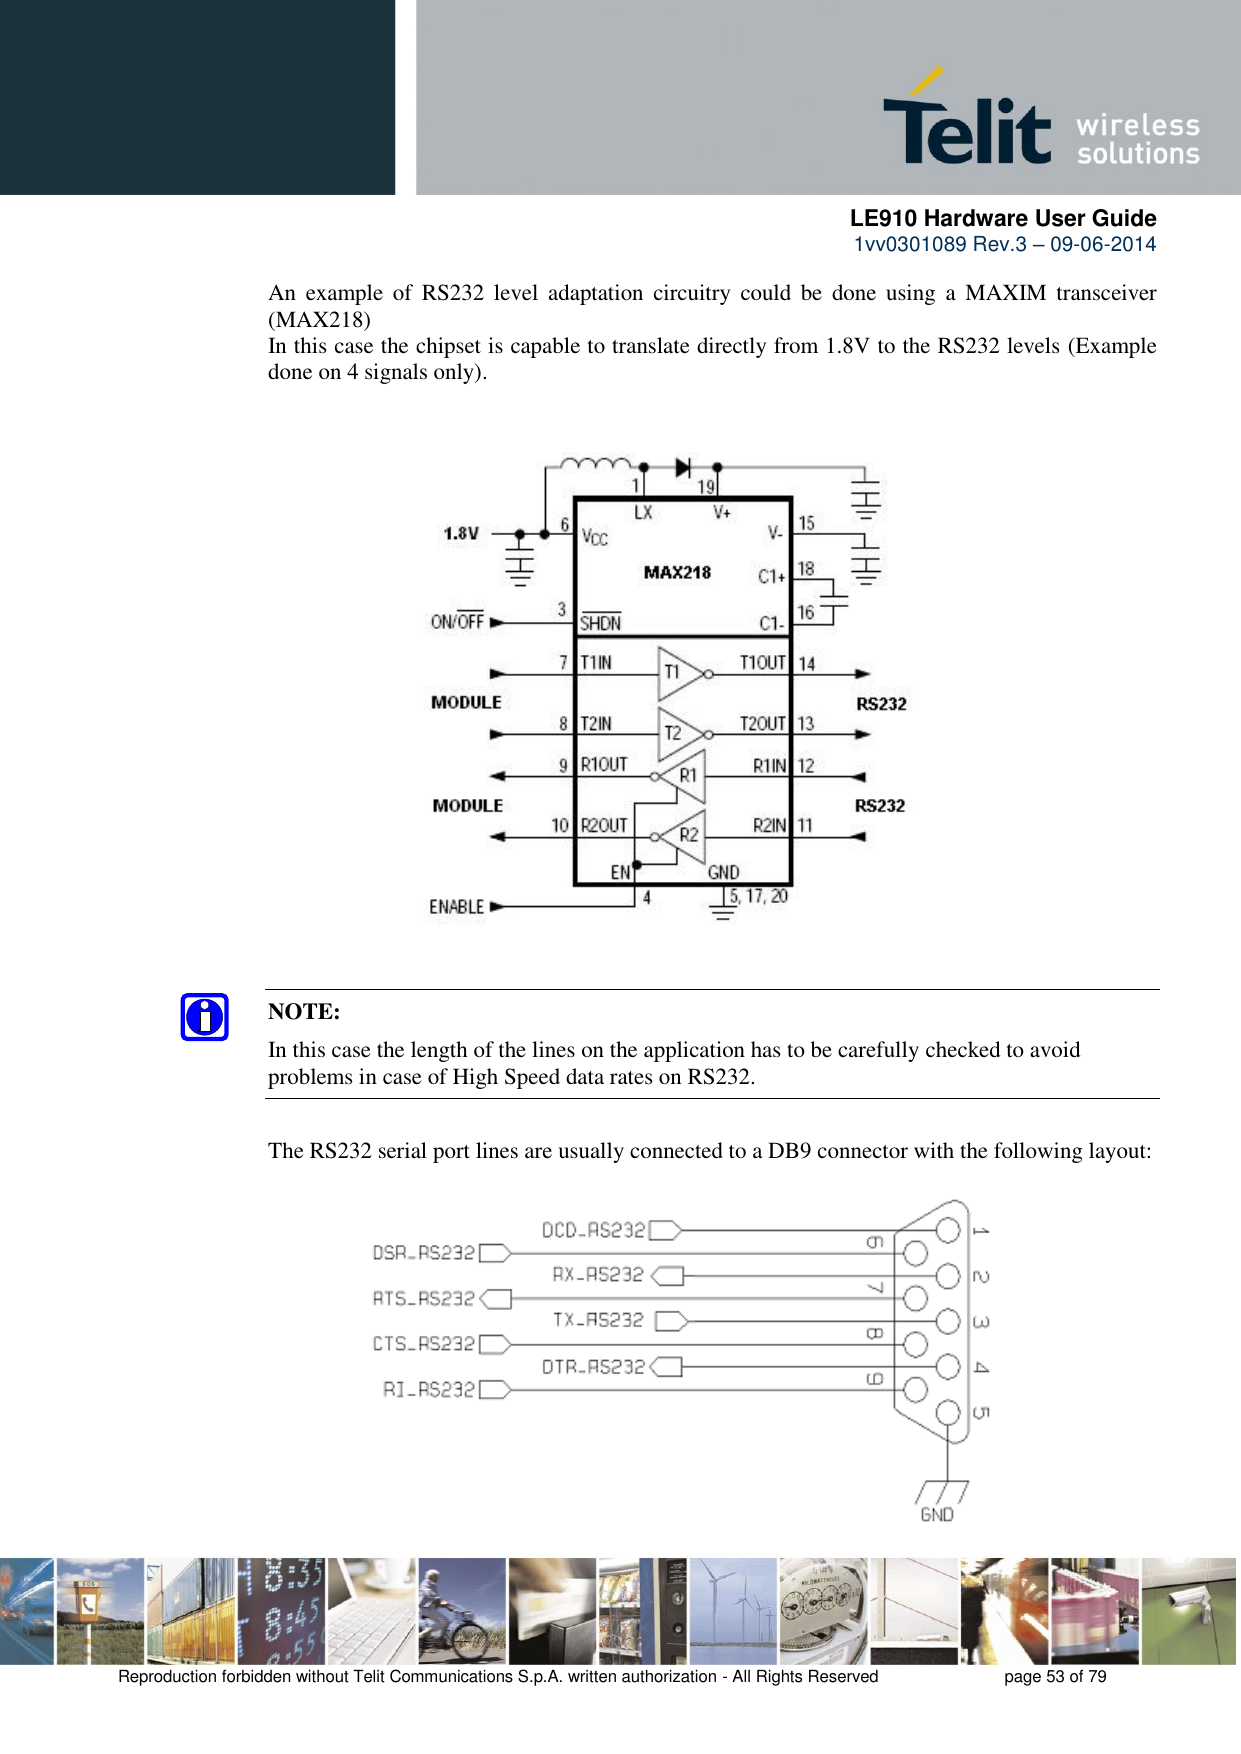      LE910 Hardware User Guide 1vv0301089 Rev.3 – 09-06-2014    Reproduction forbidden without Telit Communications S.p.A. written authorization - All Rights Reserved    page 53 of 79  An  example  of  RS232  level  adaptation  circuitry  could  be  done using  a  MAXIM  transceiver (MAX218)  In this case the chipset is capable to translate directly from 1.8V to the RS232 levels (Example done on 4 signals only).  NOTE: In this case the length of the lines on the application has to be carefully checked to avoid problems in case of High Speed data rates on RS232. The RS232 serial port lines are usually connected to a DB9 connector with the following layout: 